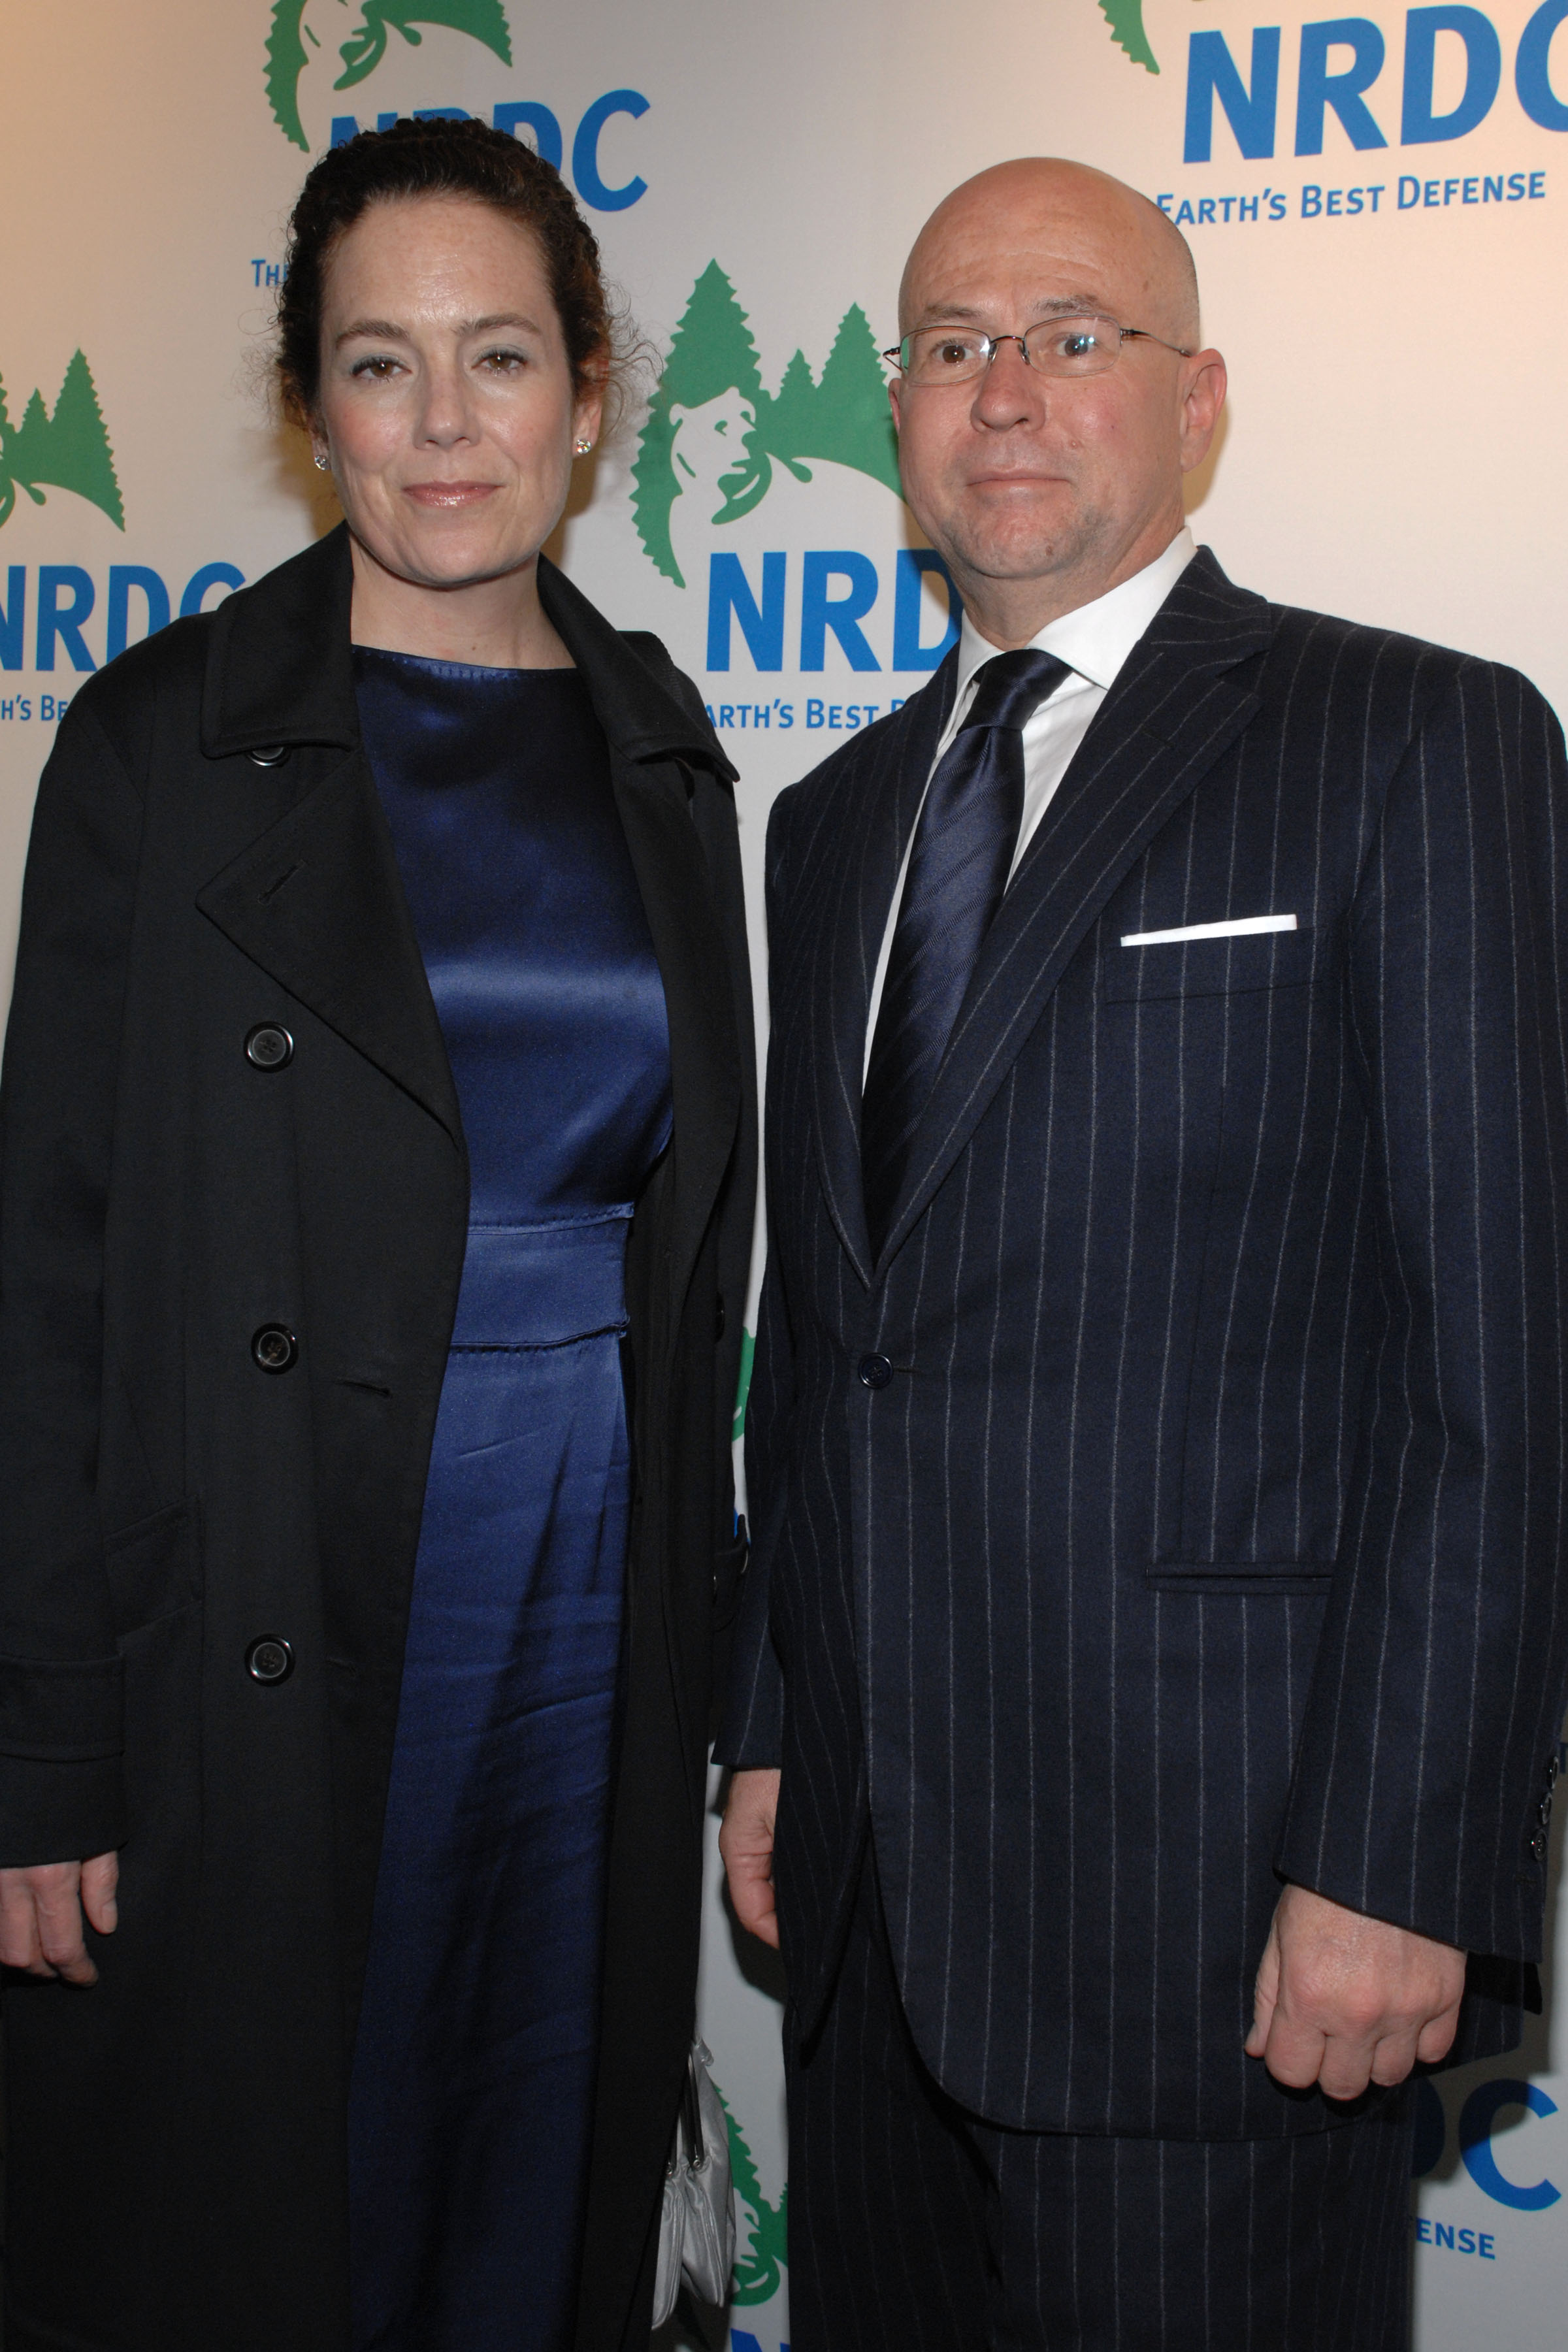 Lisa Hintelmann and David Granger at NRDC's 10th Annual Forces of Nature Gala on April 1, 2008, in New York City. | Source: Getty Images